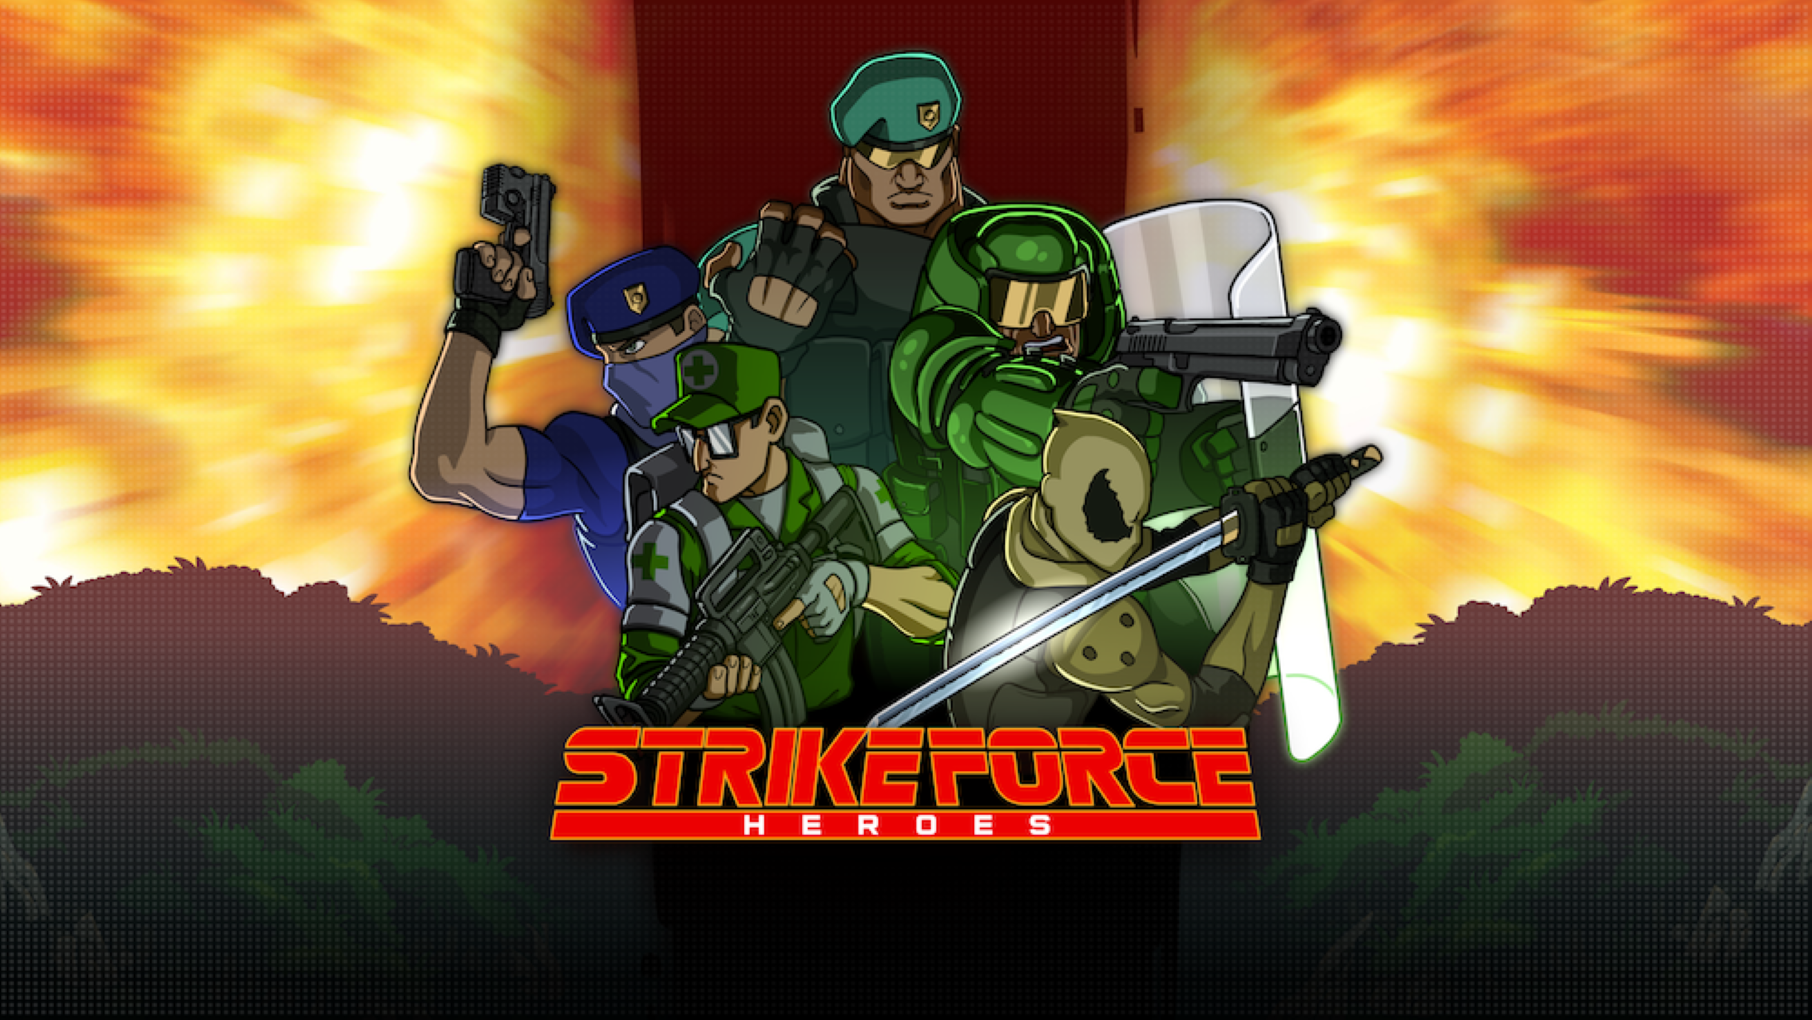 Old-School Arena Shooter with a Modern Twist, Strike Force Heroes, Now Available on PC